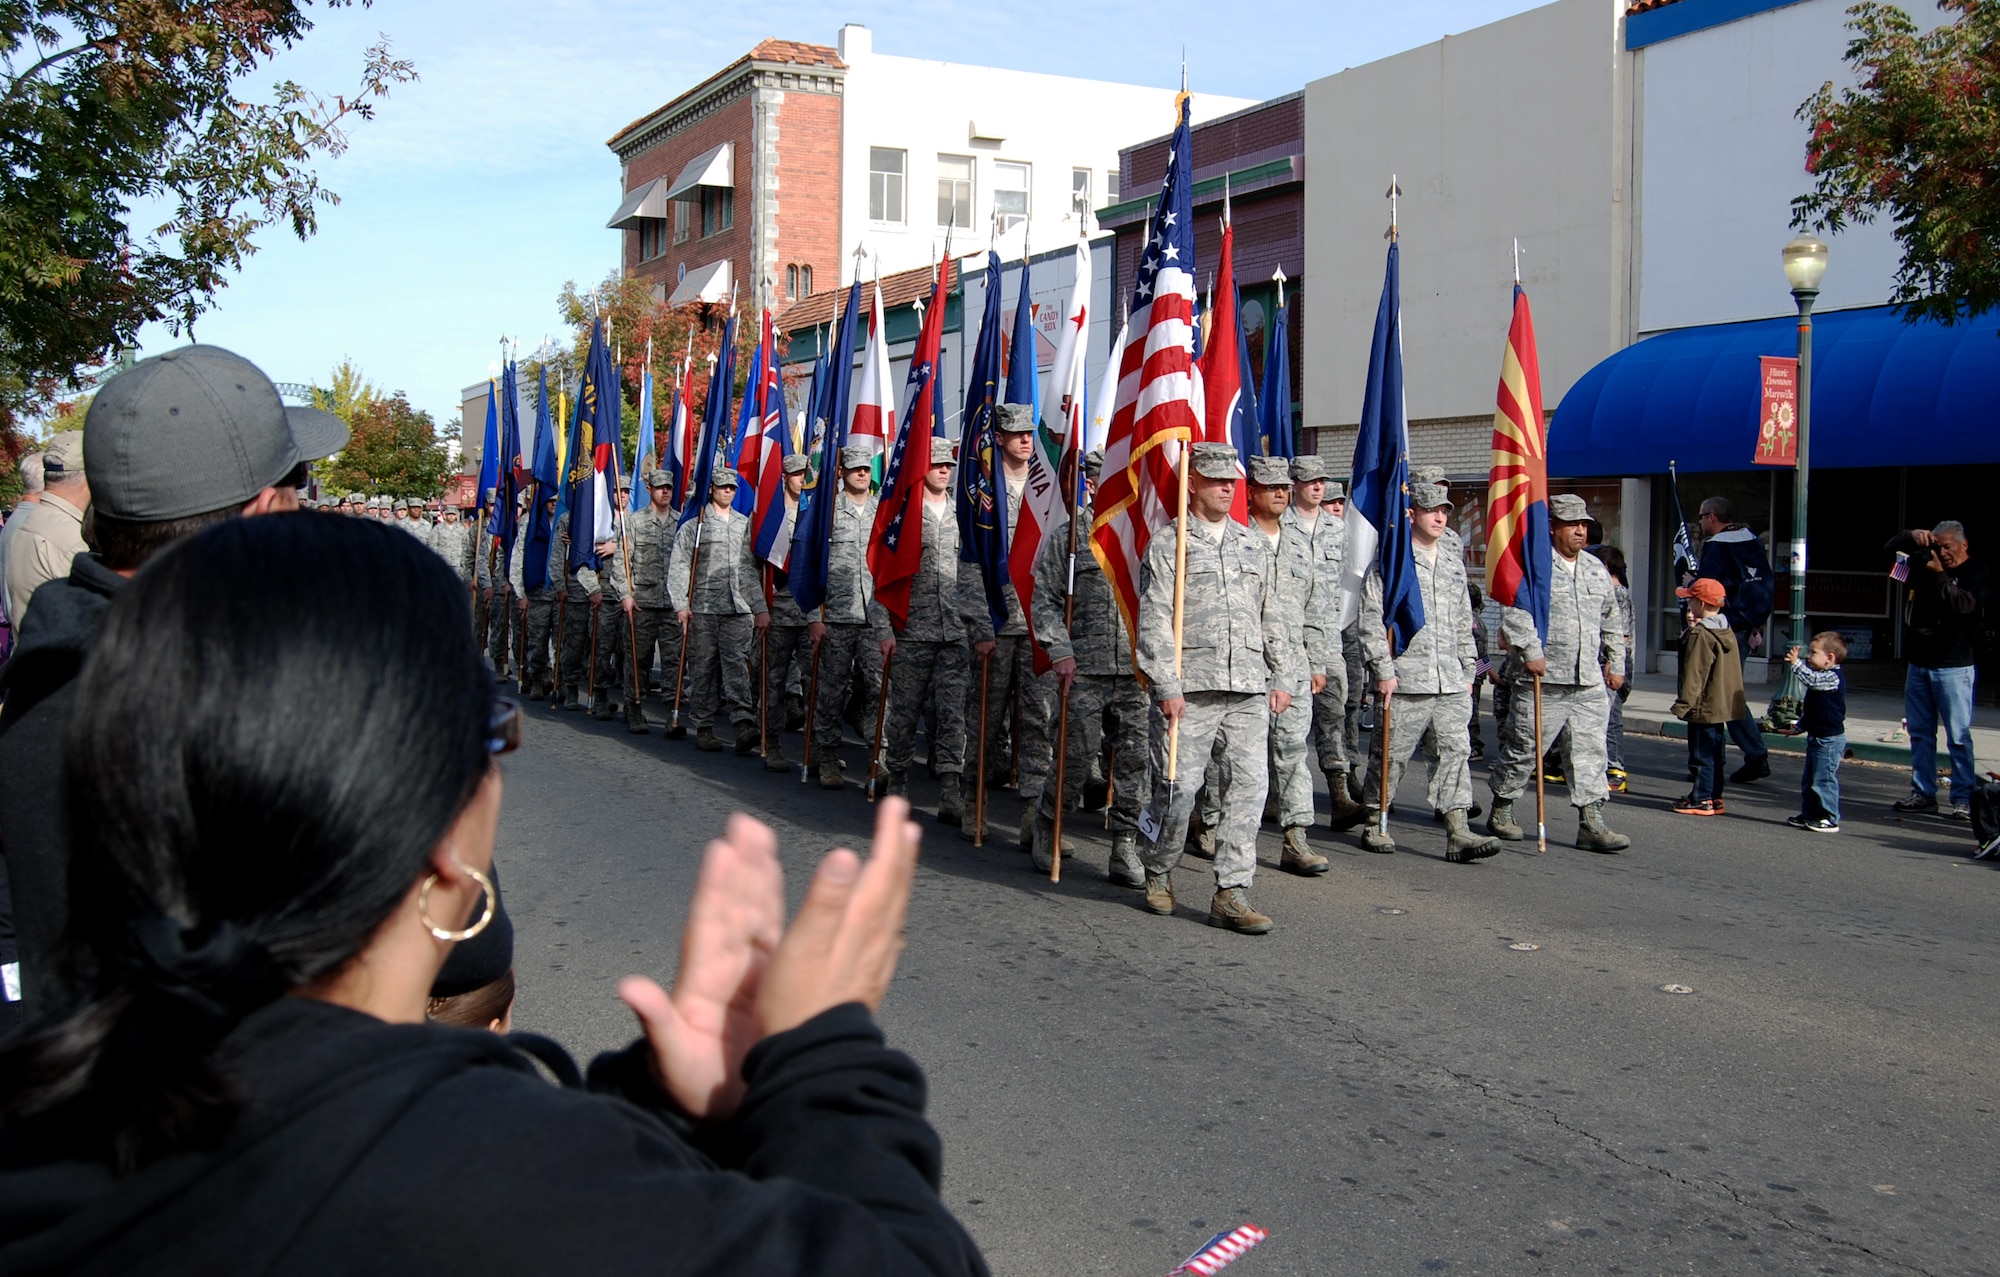 The 9th Communications Squadron marches with the state flags during the Yuba-Sutter Veterans Day Parade in Marysville, Calif., Nov. 11, 2012. More than 400 Team Beale Airmen participated in the parade. (U.S. Air Force photo by Capt. Brian Wagner/Released)